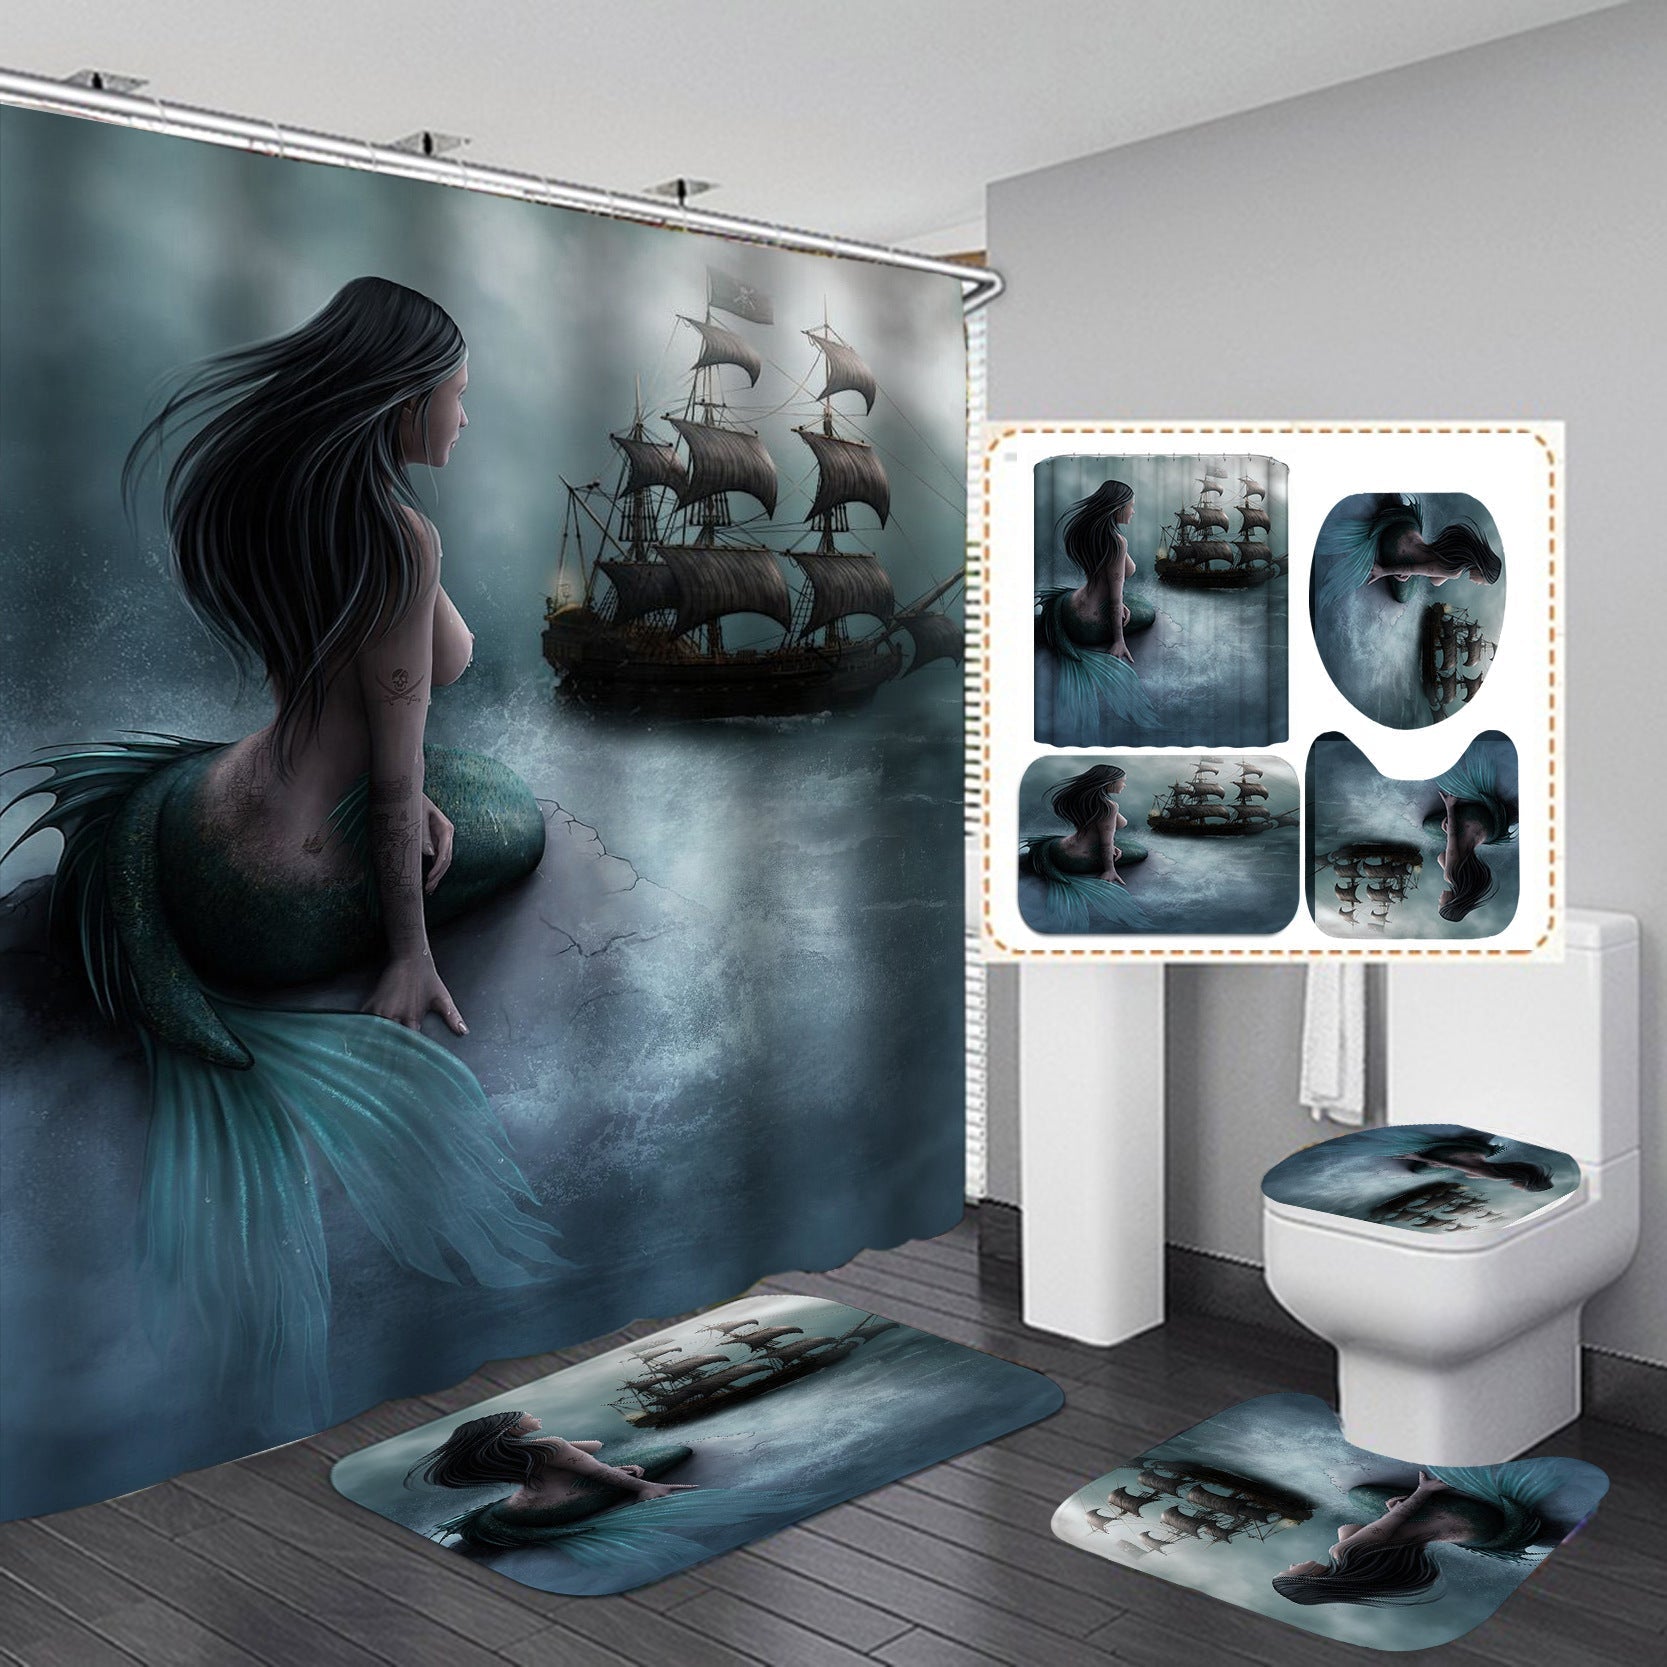 Cartoon Mermaid Design Shower Curtain Bathroom SetsNon-Slip Toilet Lid Cover-Shower Curtain-180×180cm Shower Curtain Only-4-Free Shipping Leatheretro